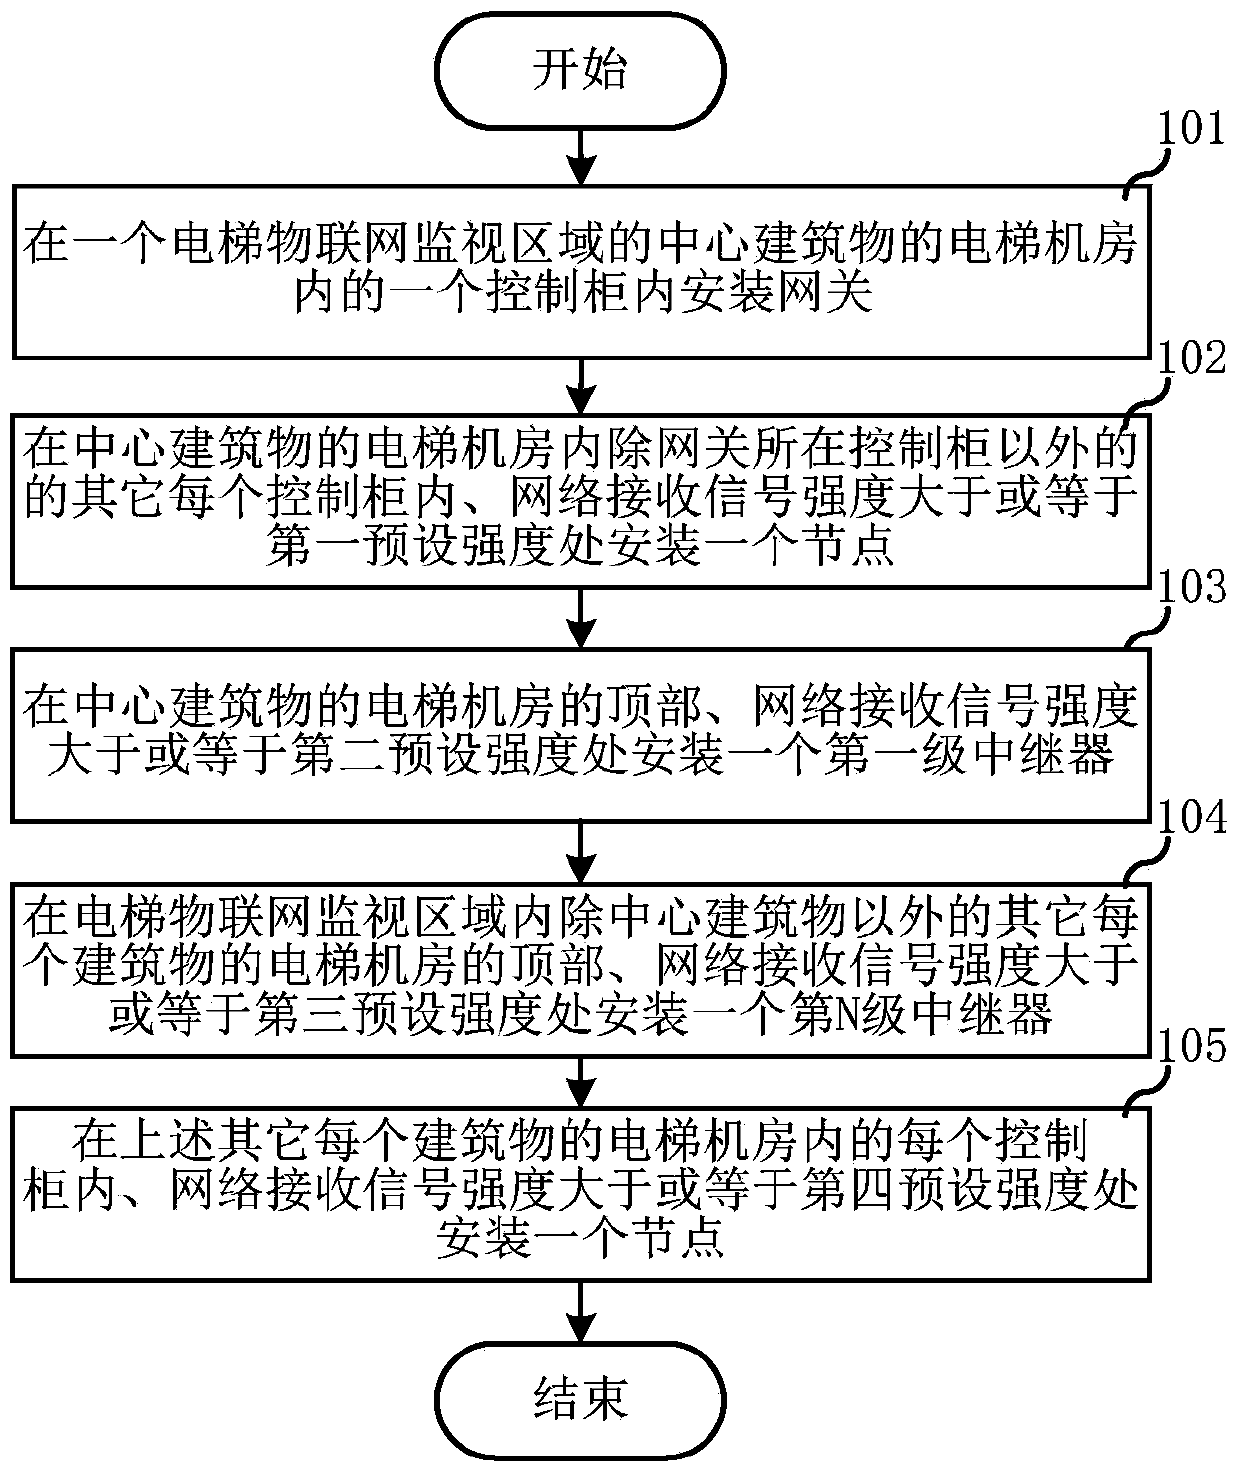 Method for installing local area network in elevator internet of things